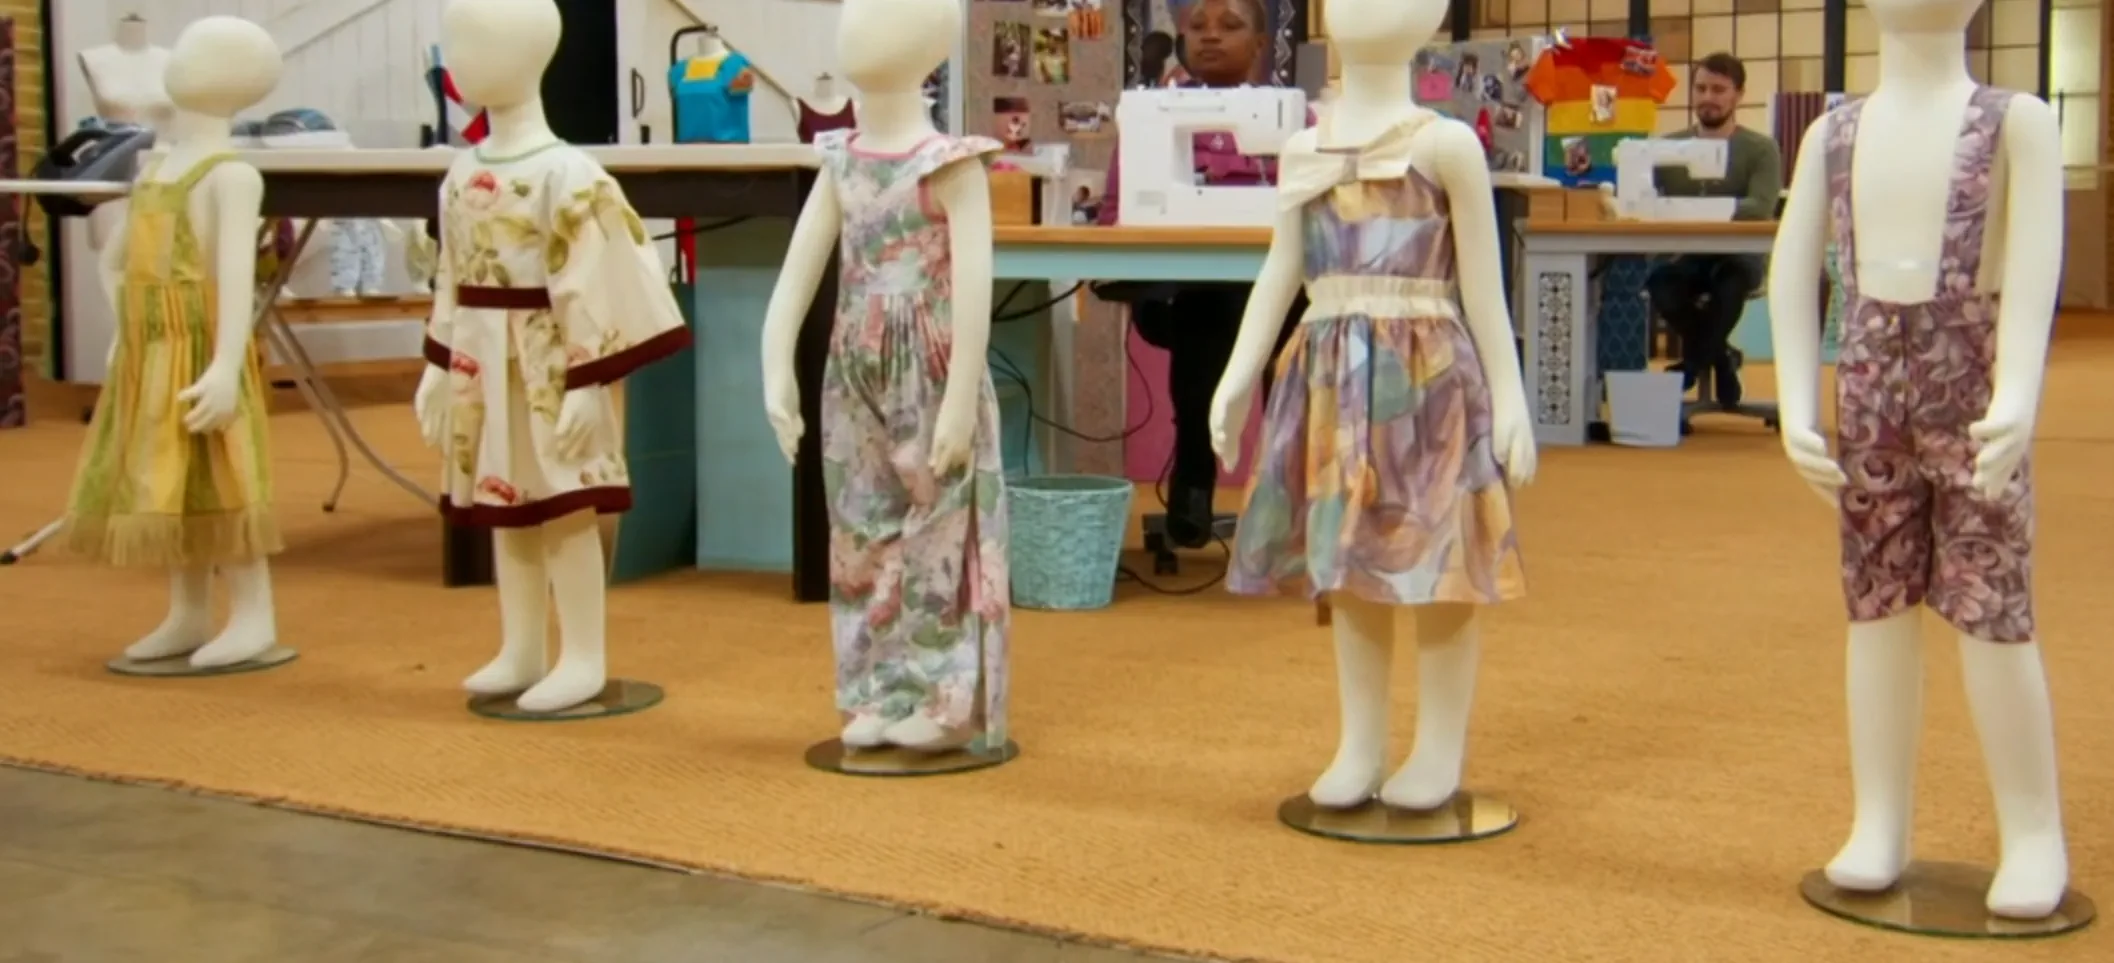 Five child's play outfits made from upcycled curtains